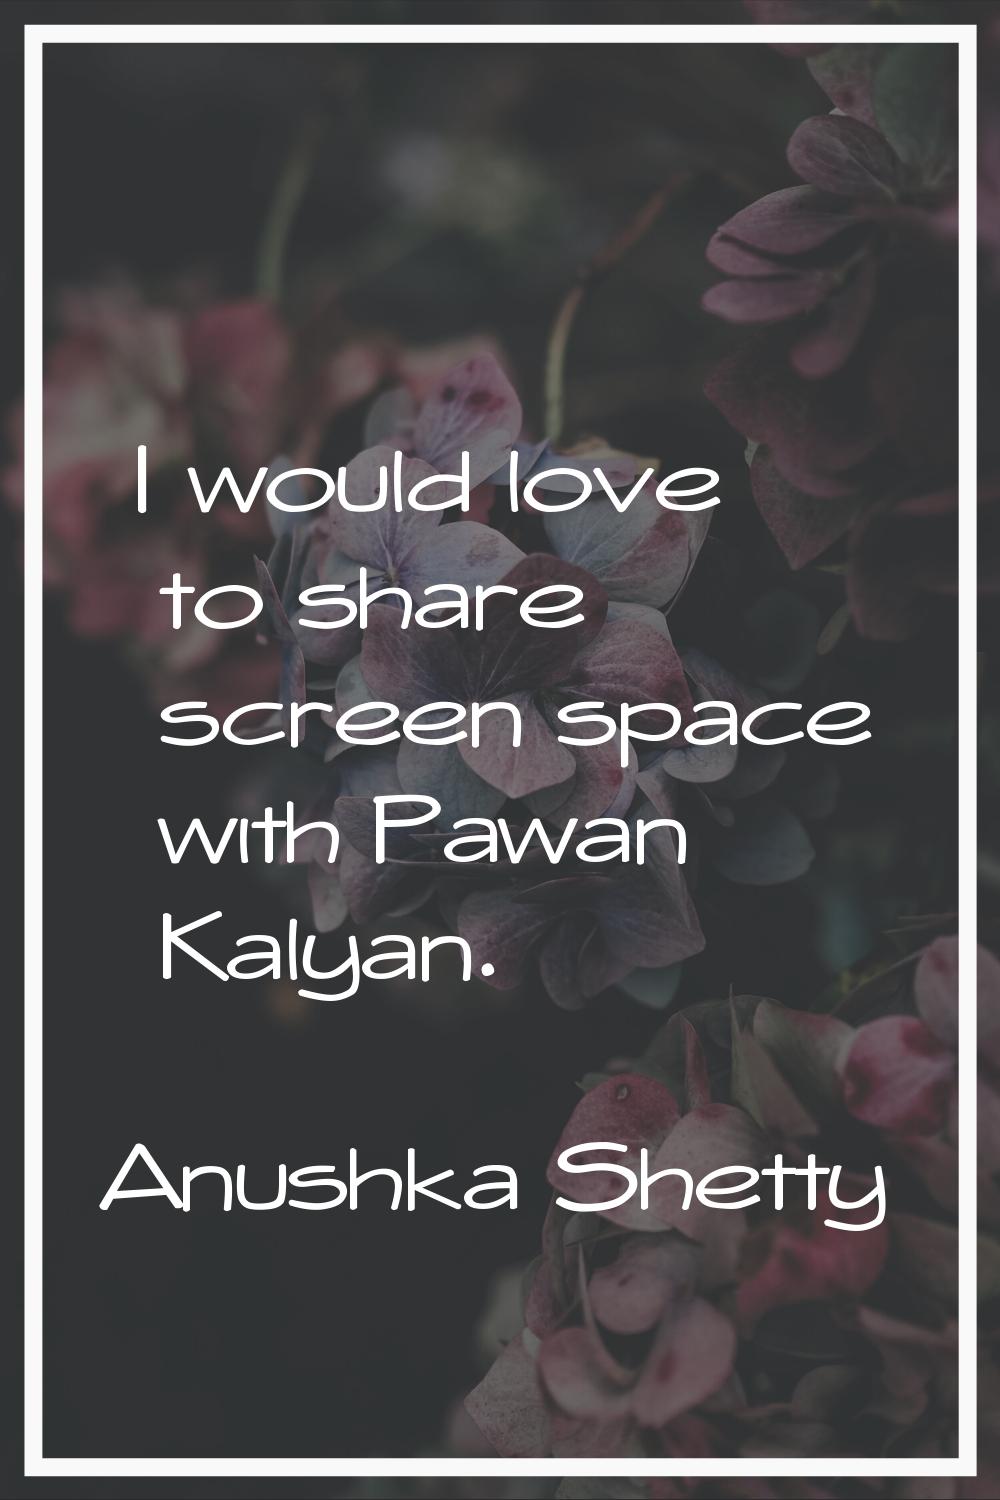 I would love to share screen space with Pawan Kalyan.